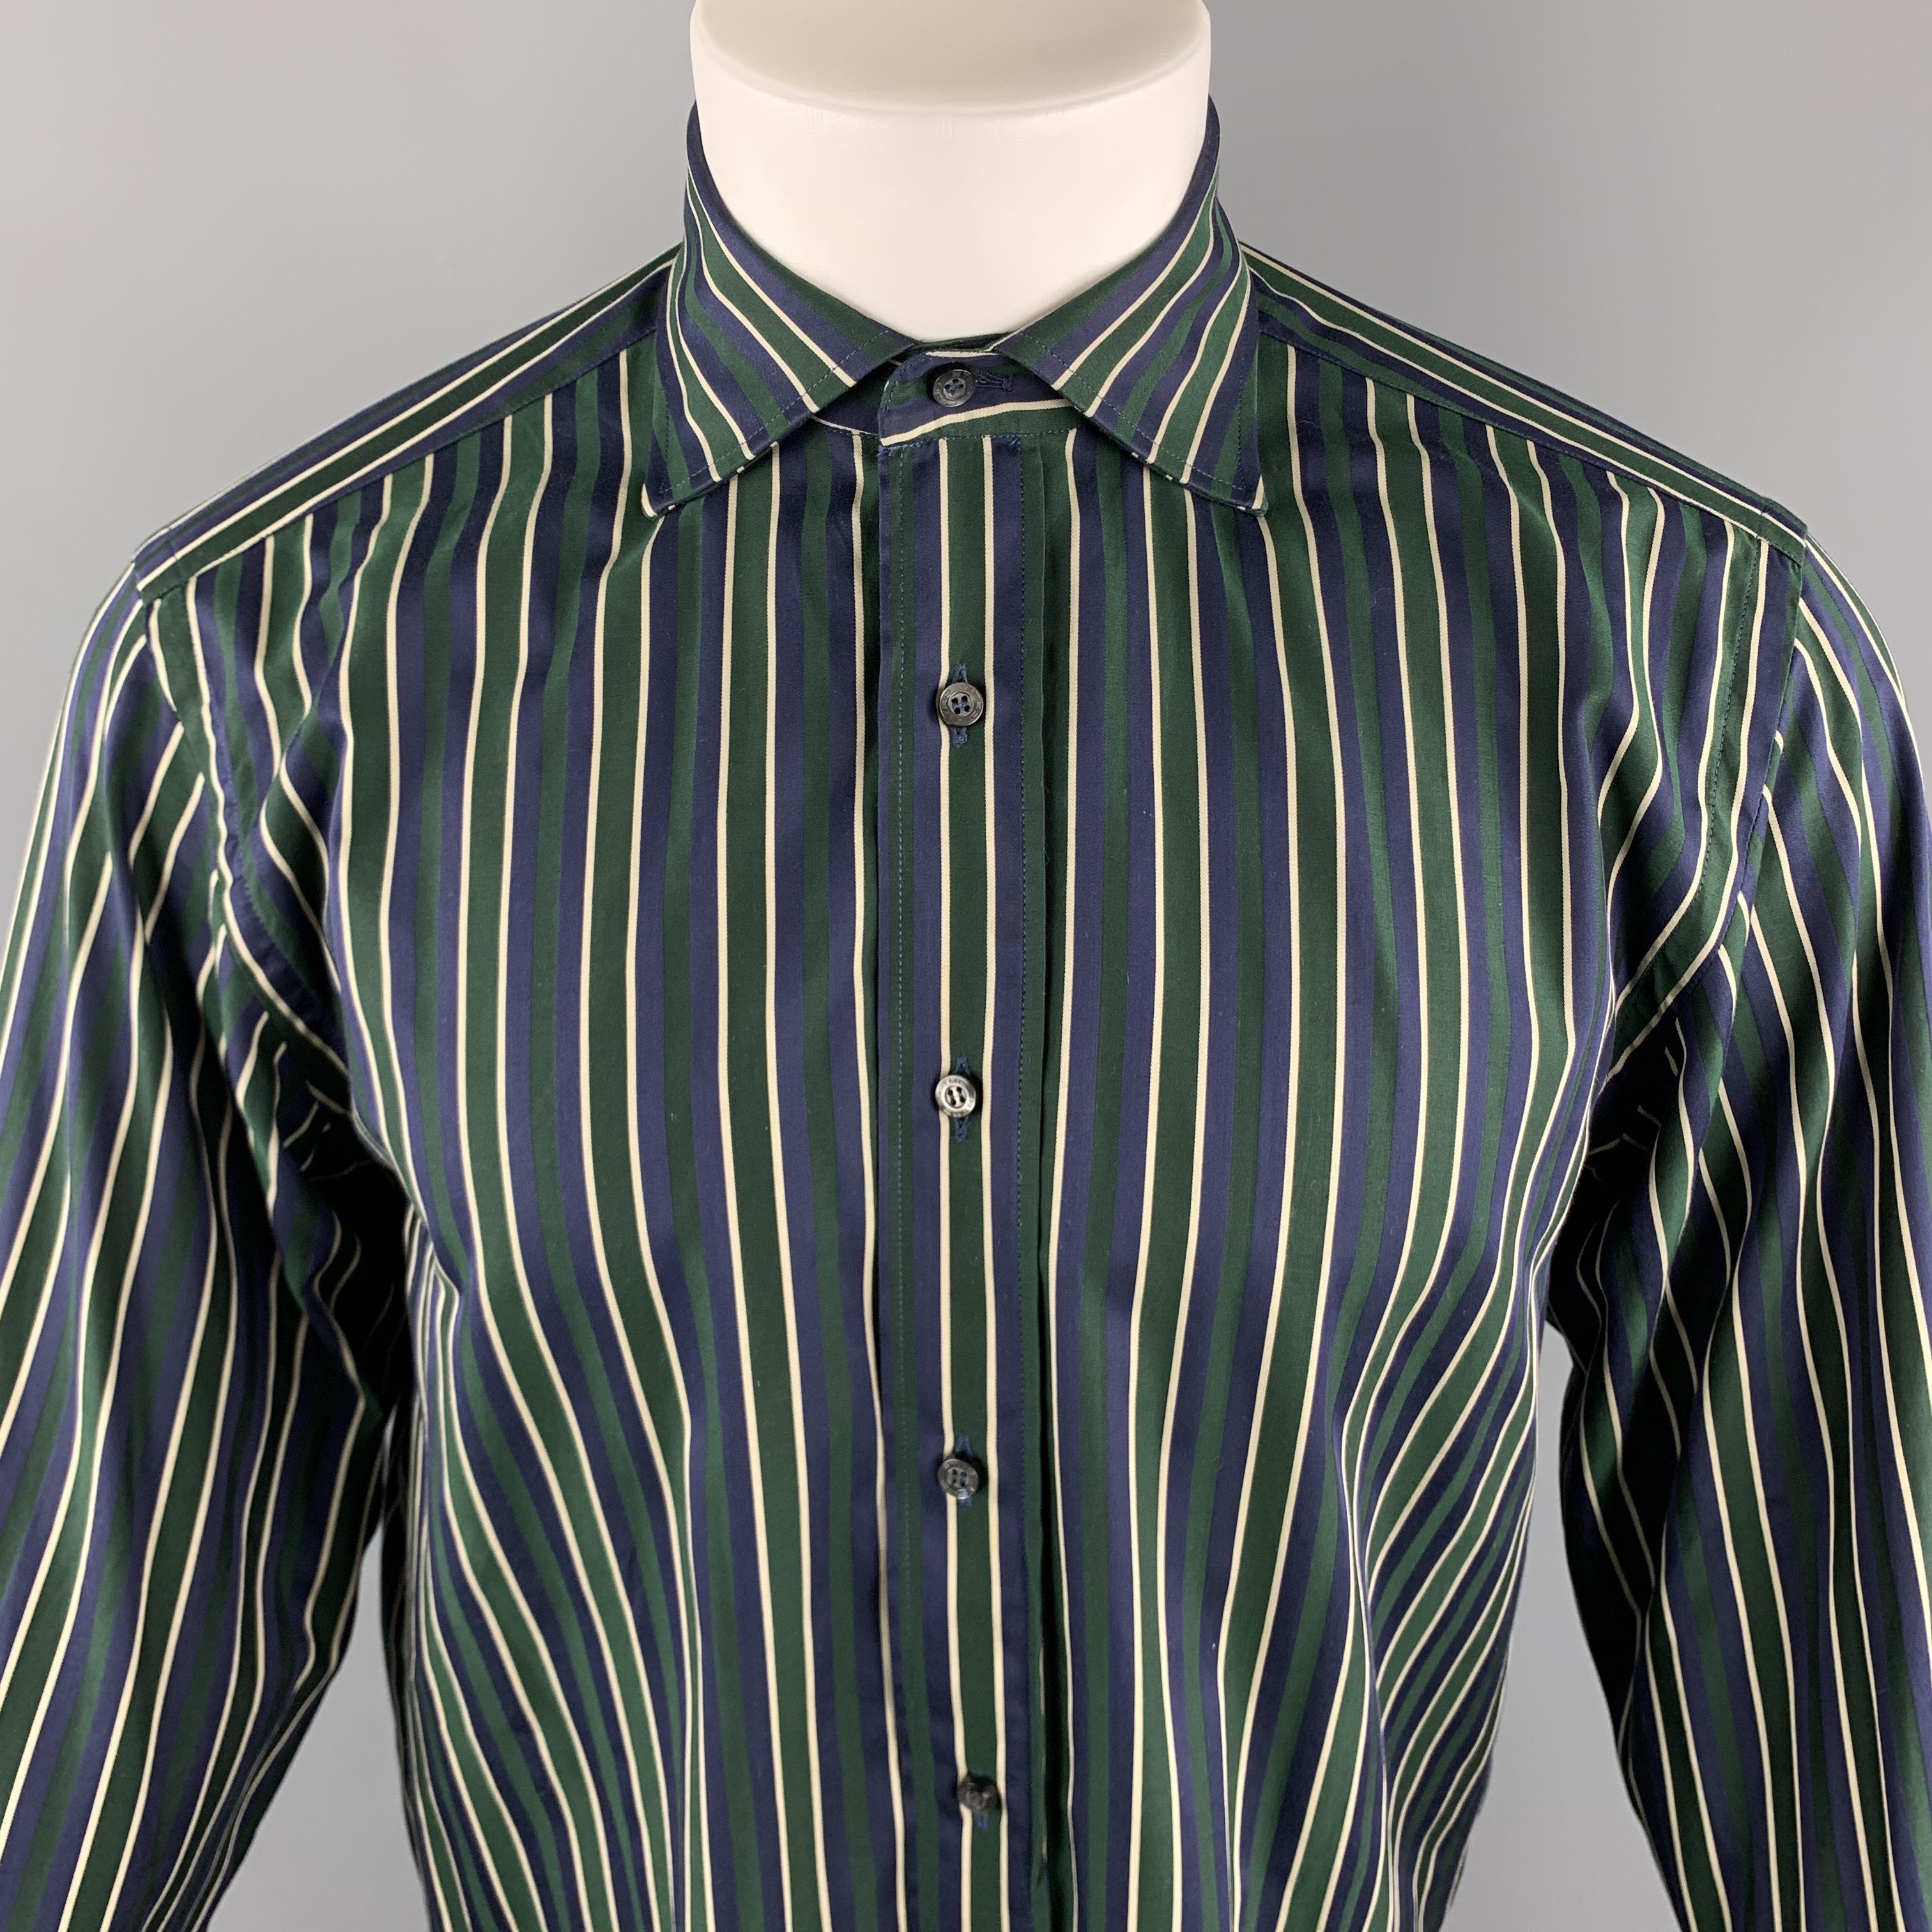 ETRO Long Sleeve Shirt comes in navy and green tones in a striped cotton material, with a spread collar and buttoned cuffs, button up. Made in Italy.

Very Good Pre-Owned Condition.
Marked: 39

Measurements:

Shoulder: 18 in. 
Chest: 42 in. 
Sleeve: